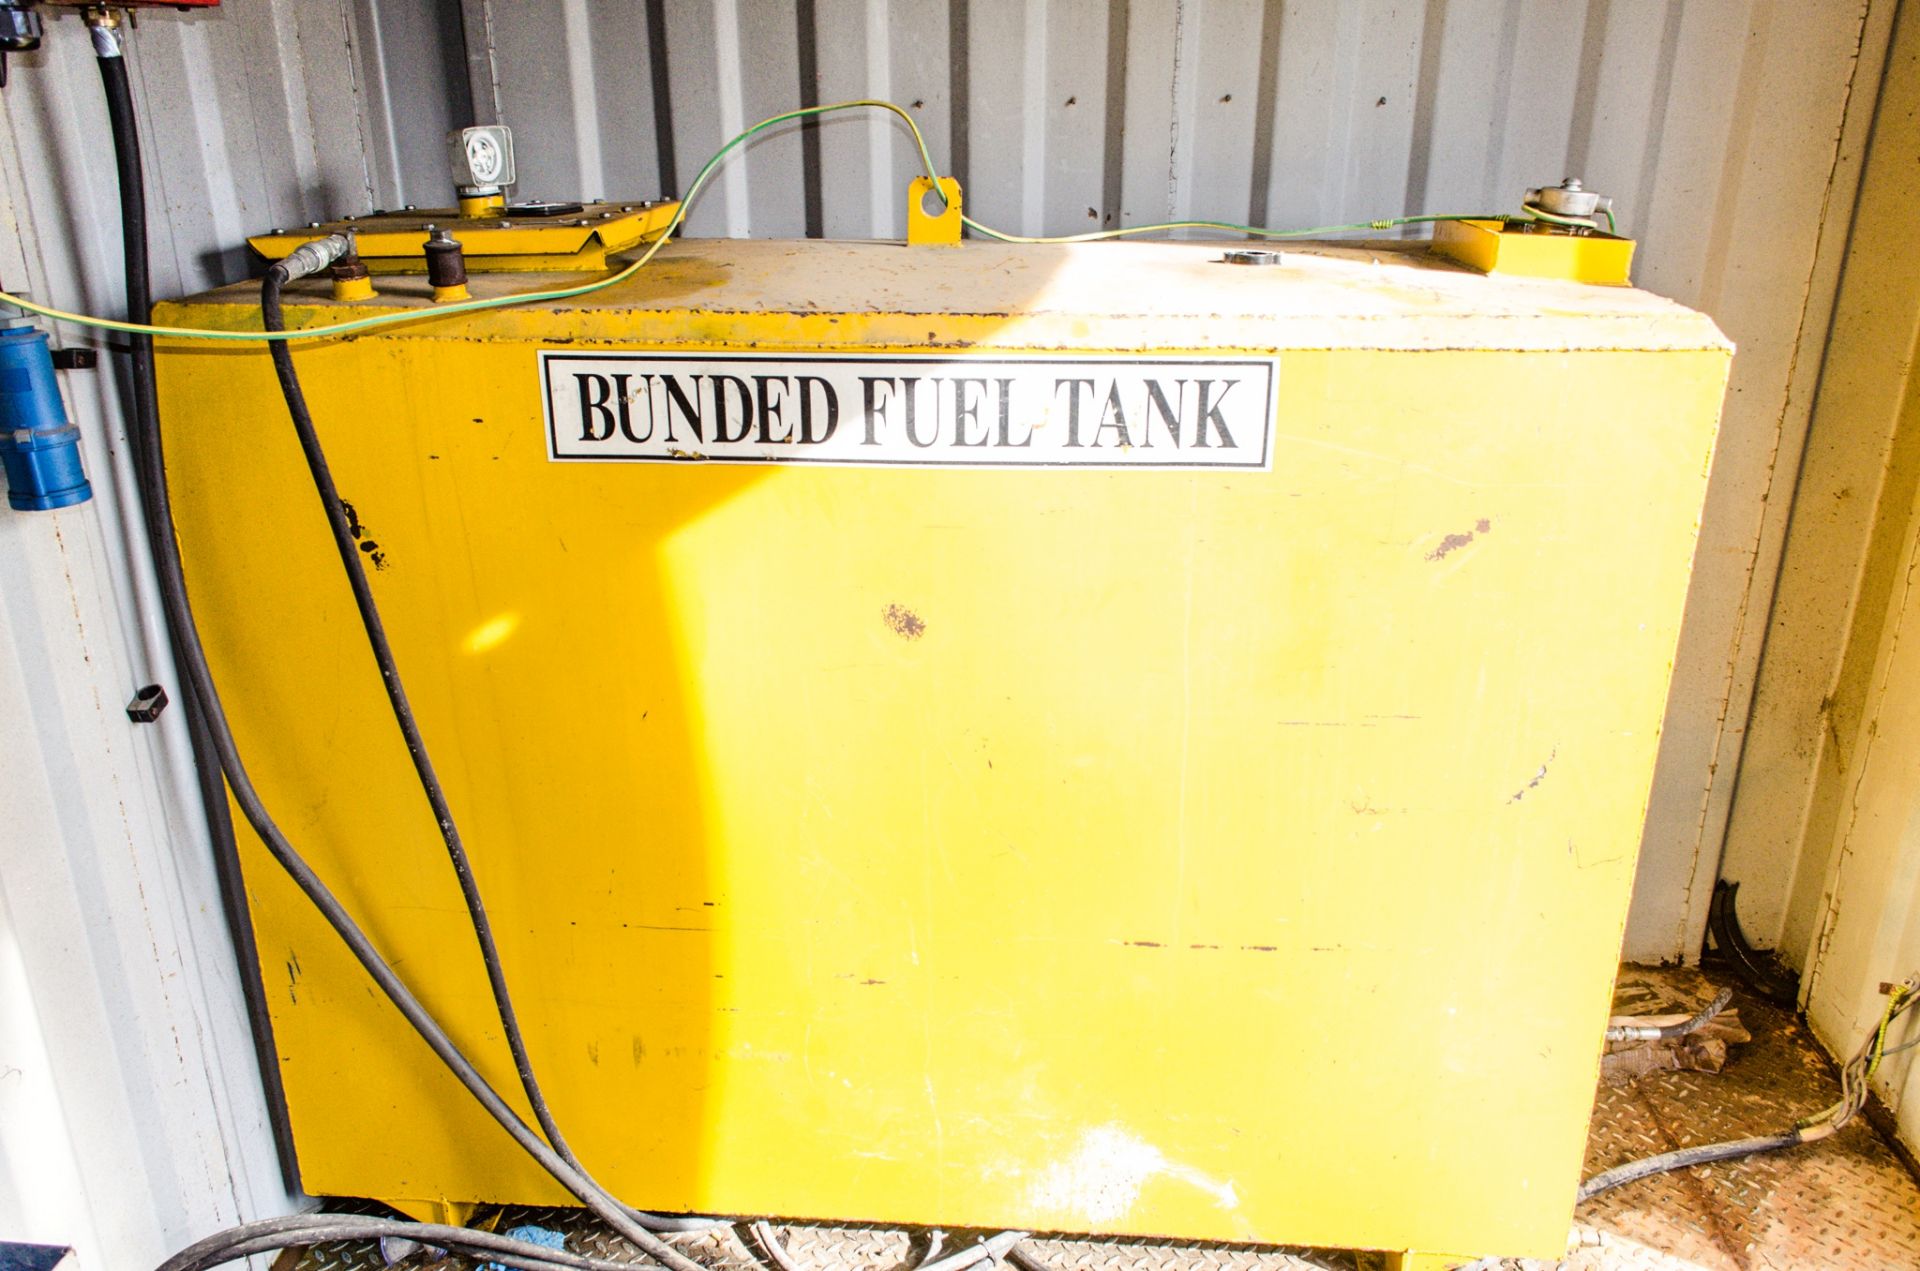 10 ft x 8 ft generator store c/w bunded fuel tank & distribution board - Image 4 of 5